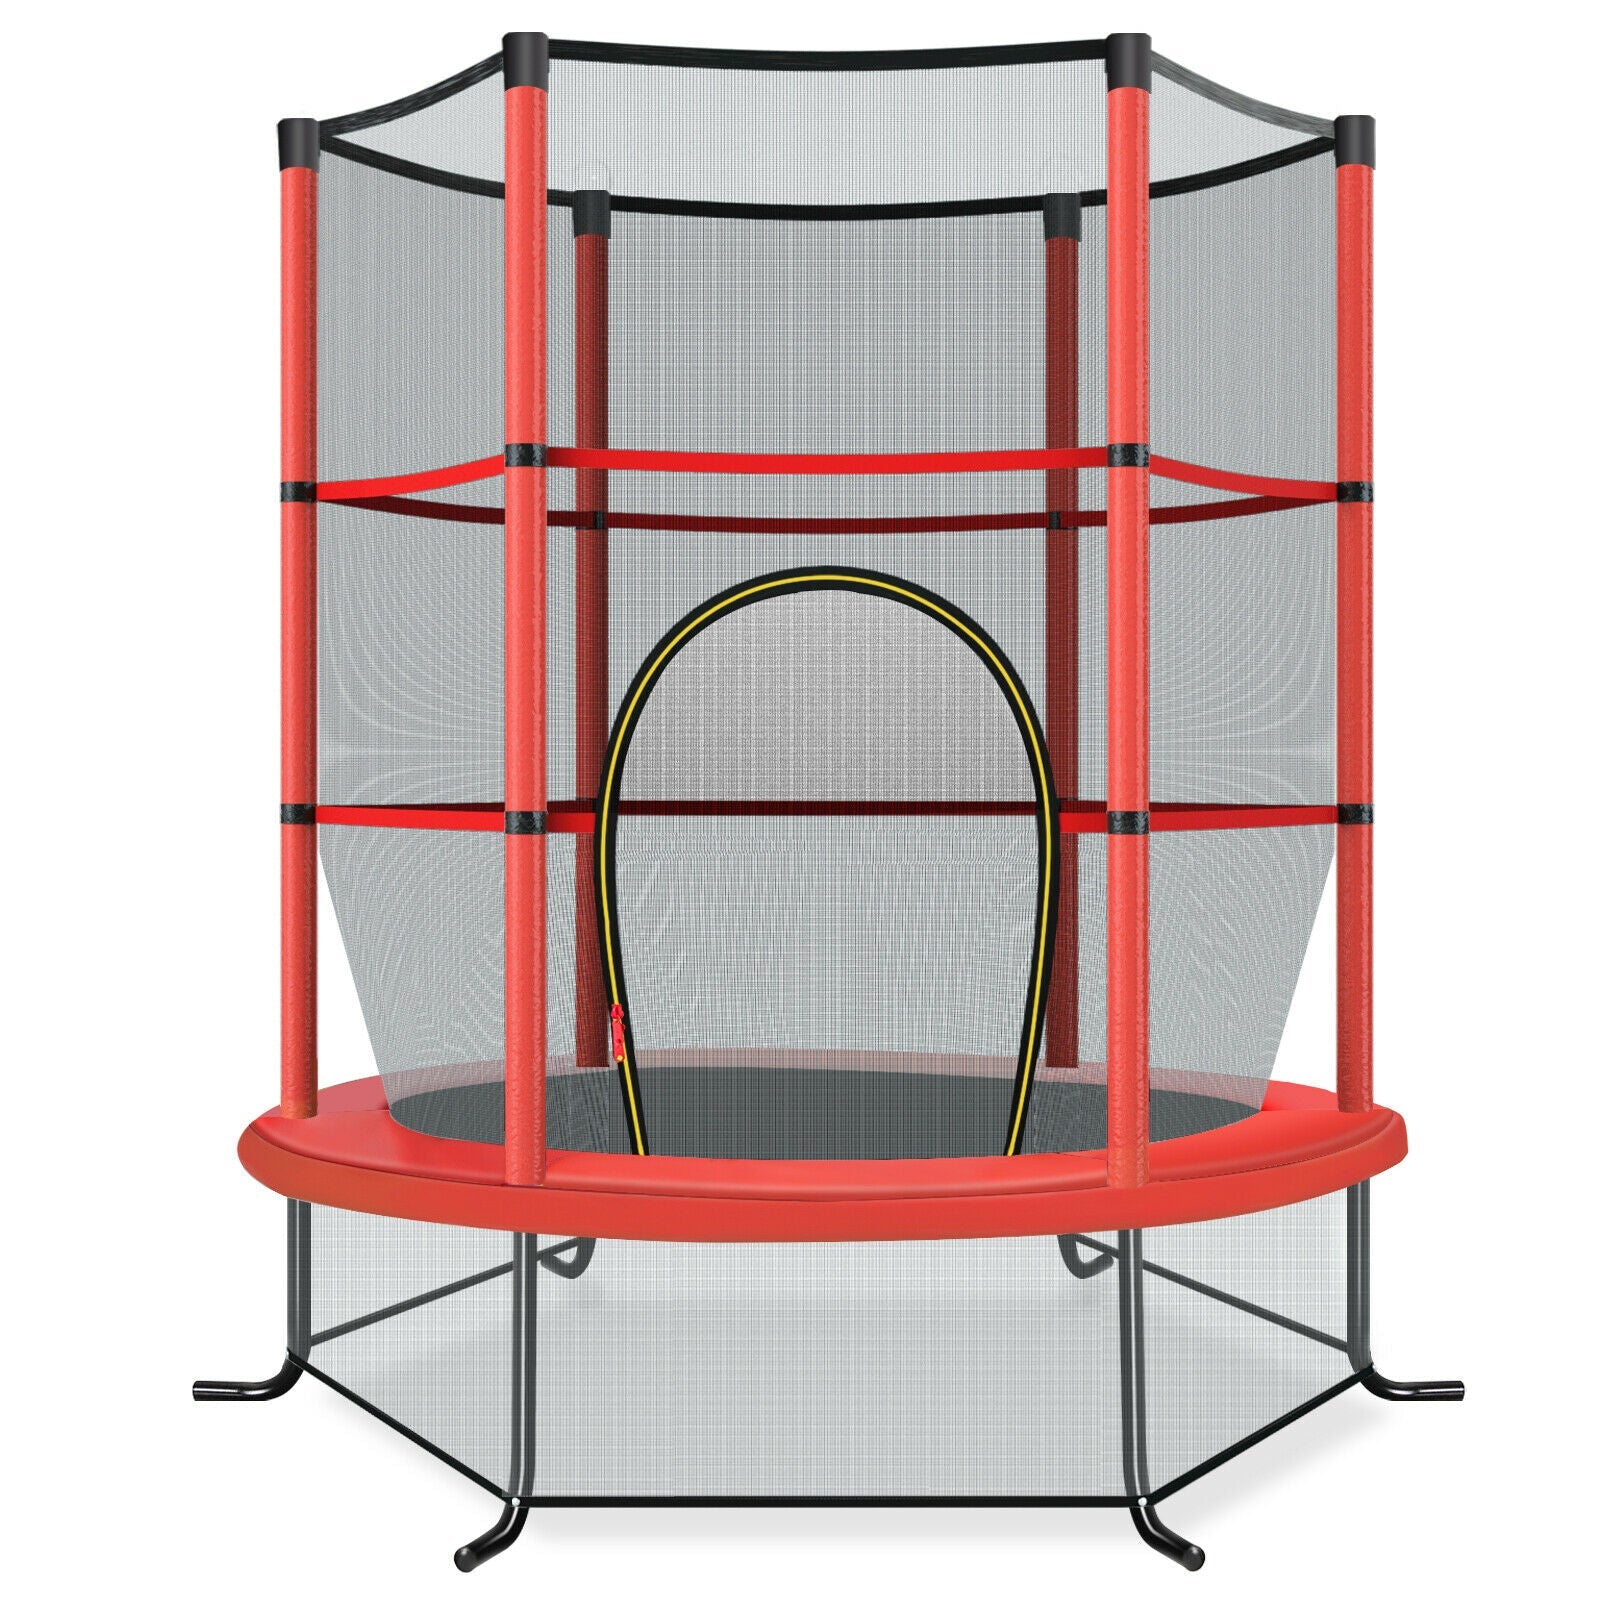 Active Fun: Red Mini Trampoline with Enclosure Net for Kids